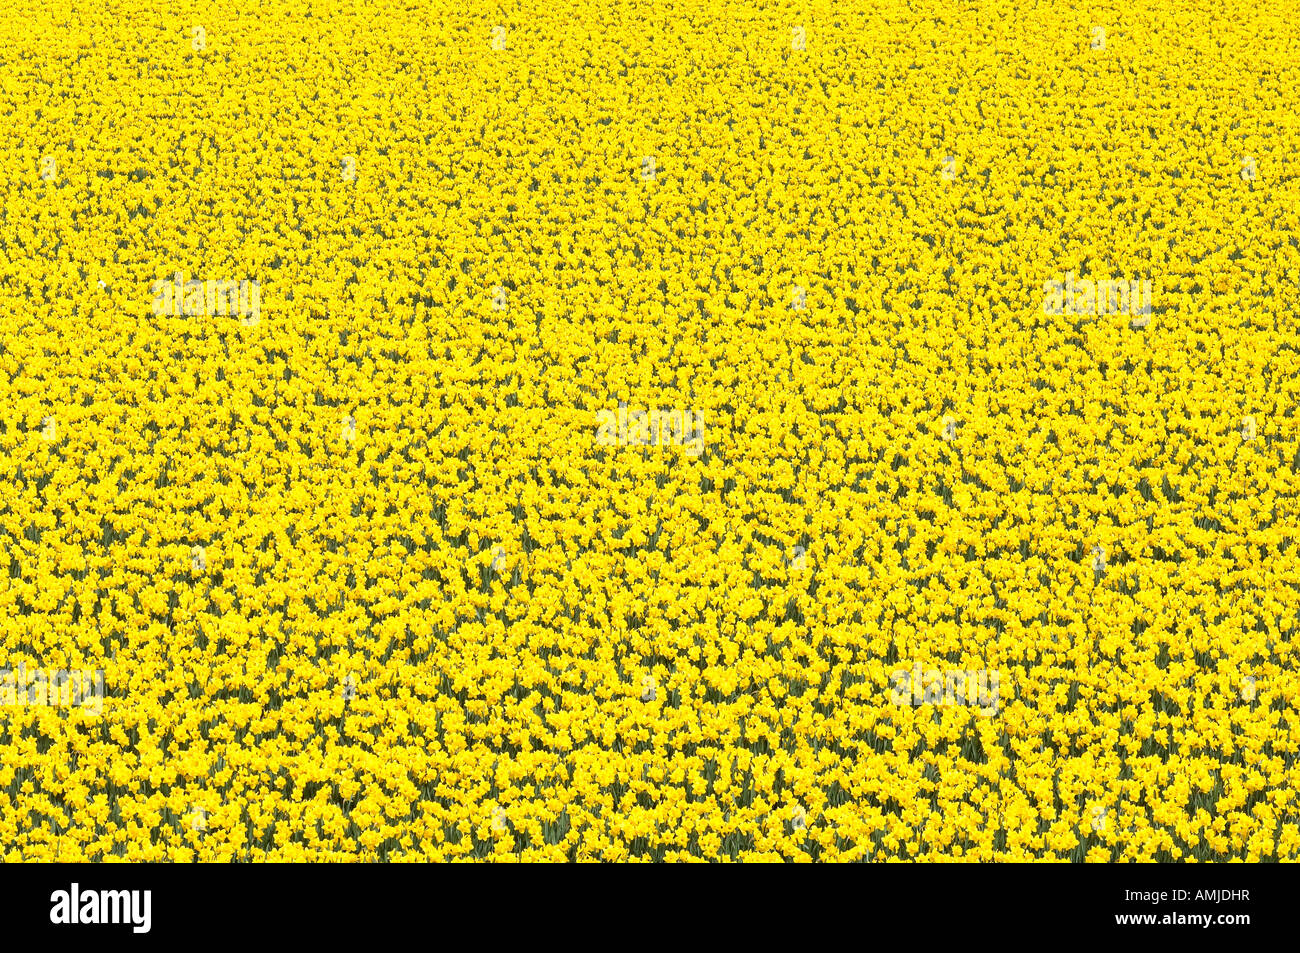 Field of yellow narcissus daffodils Stock Photo